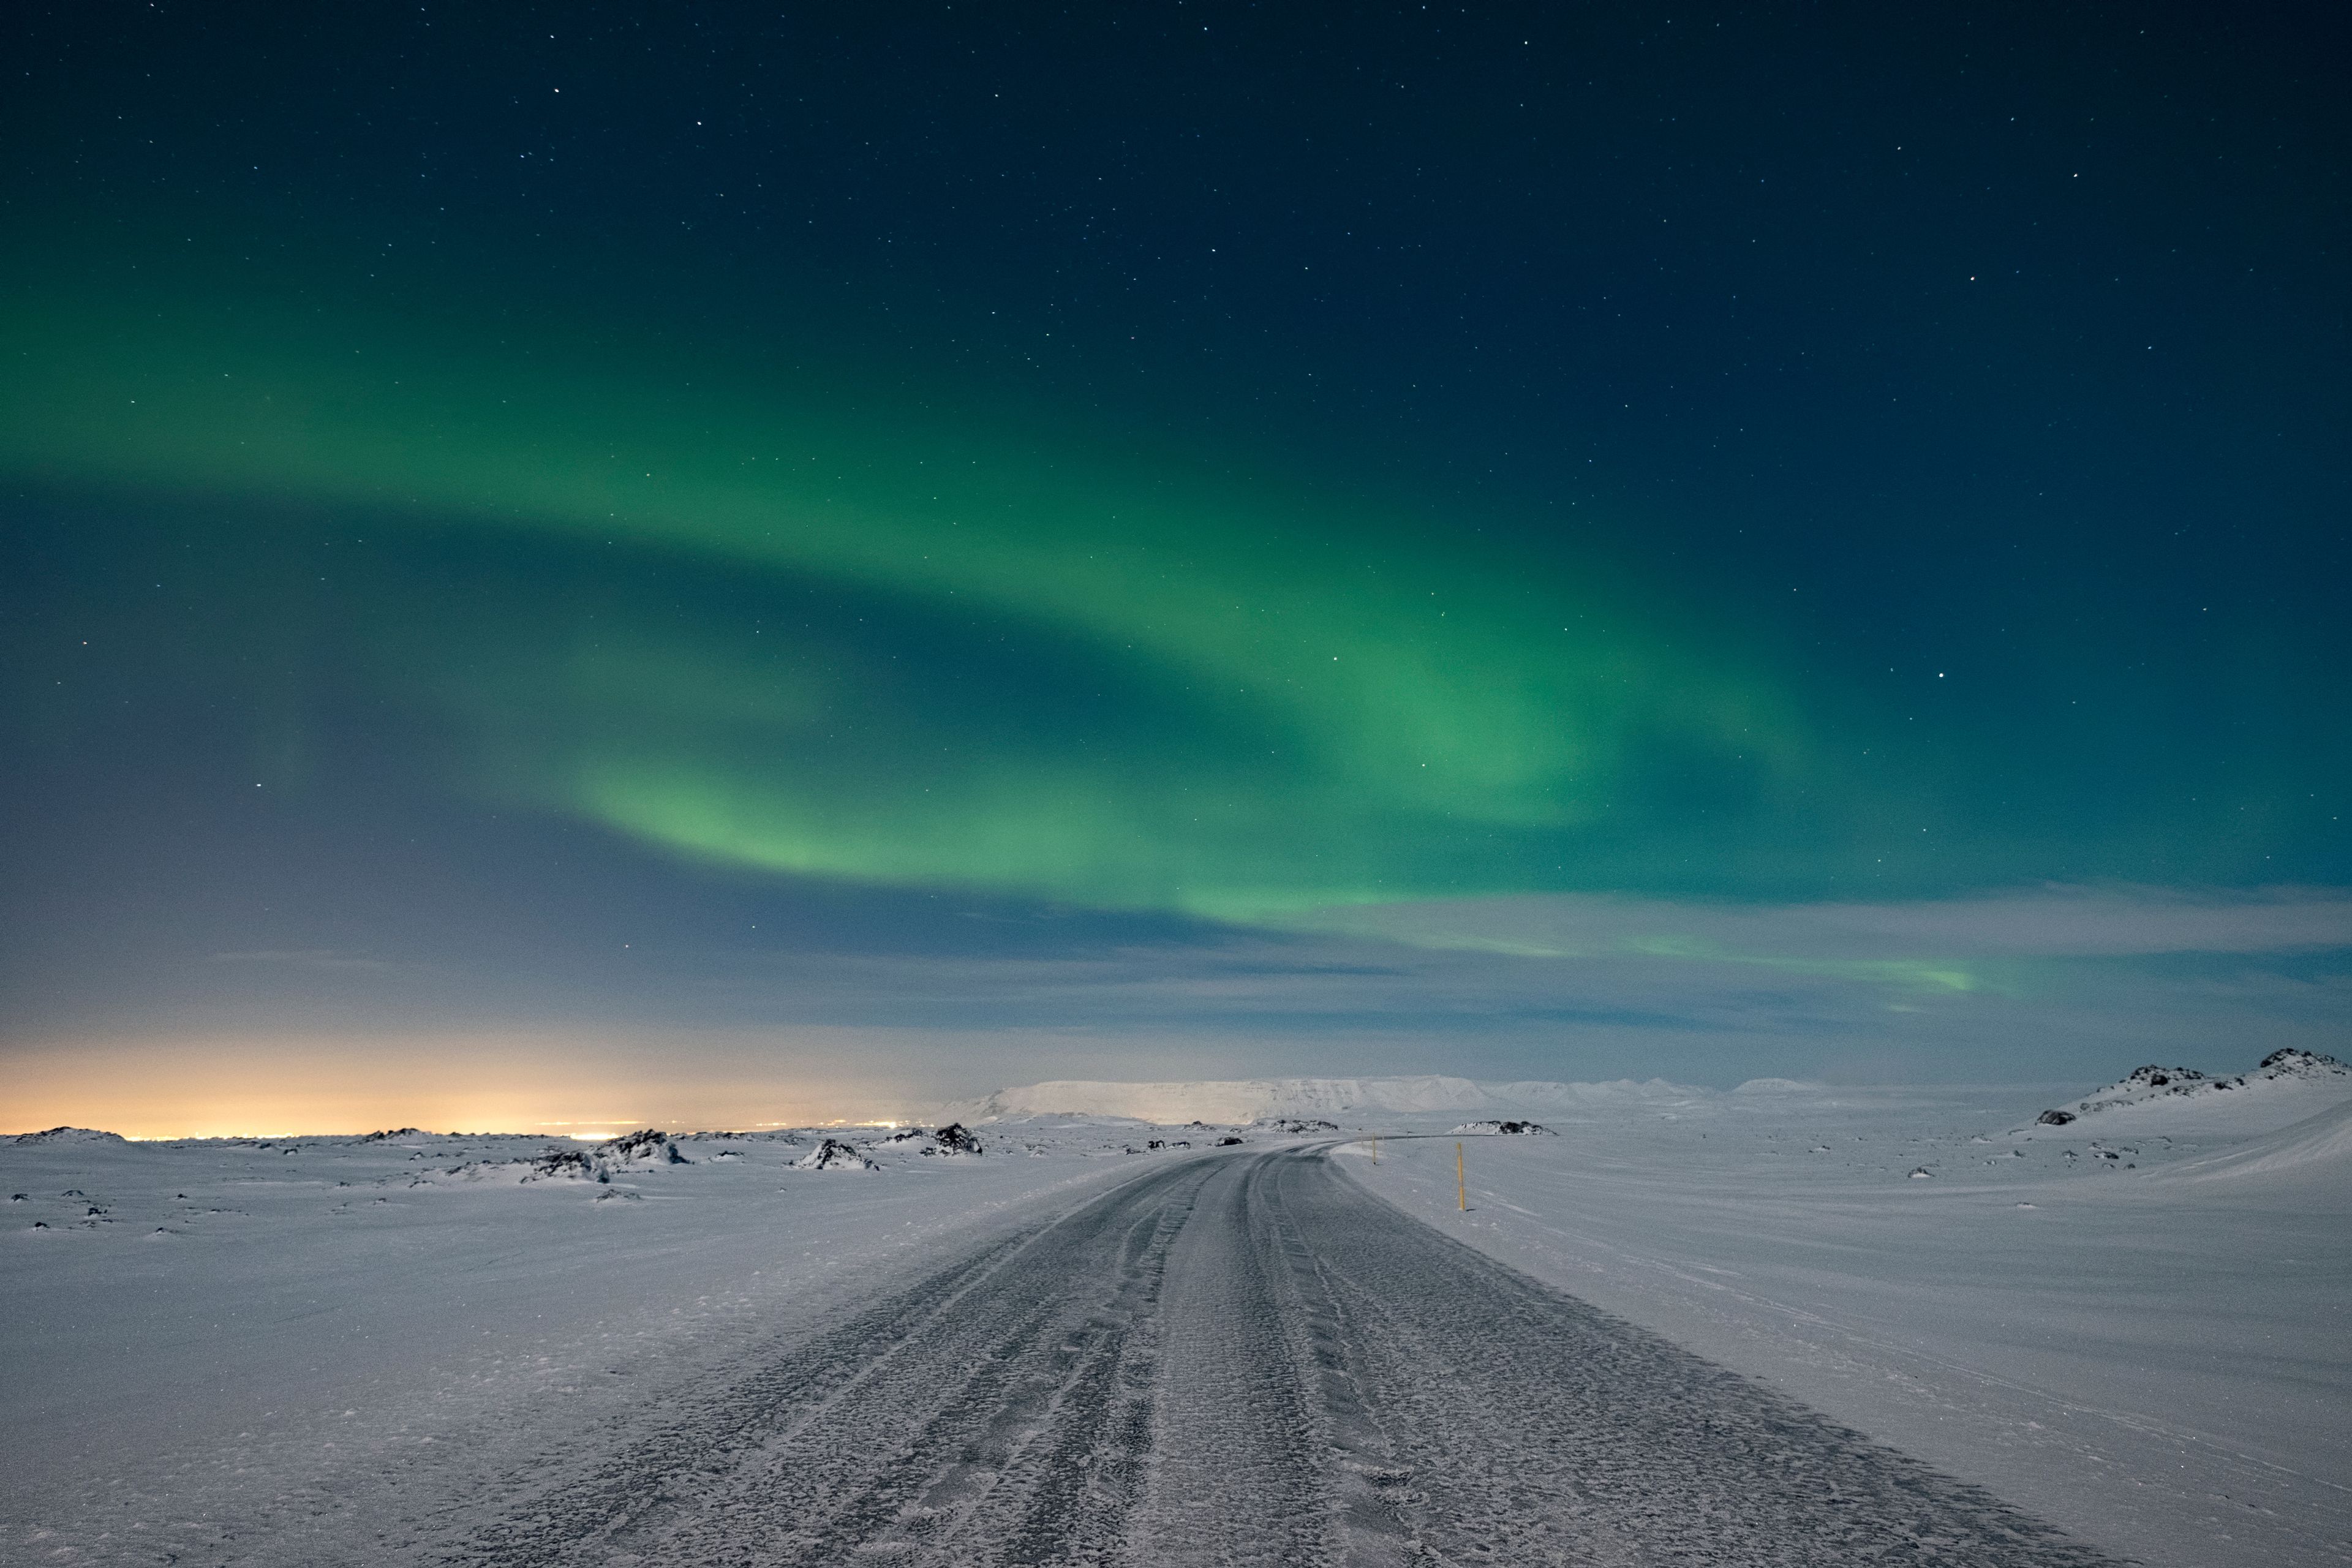 Expect snow while driving the ring road with northern lights dancing in the sky